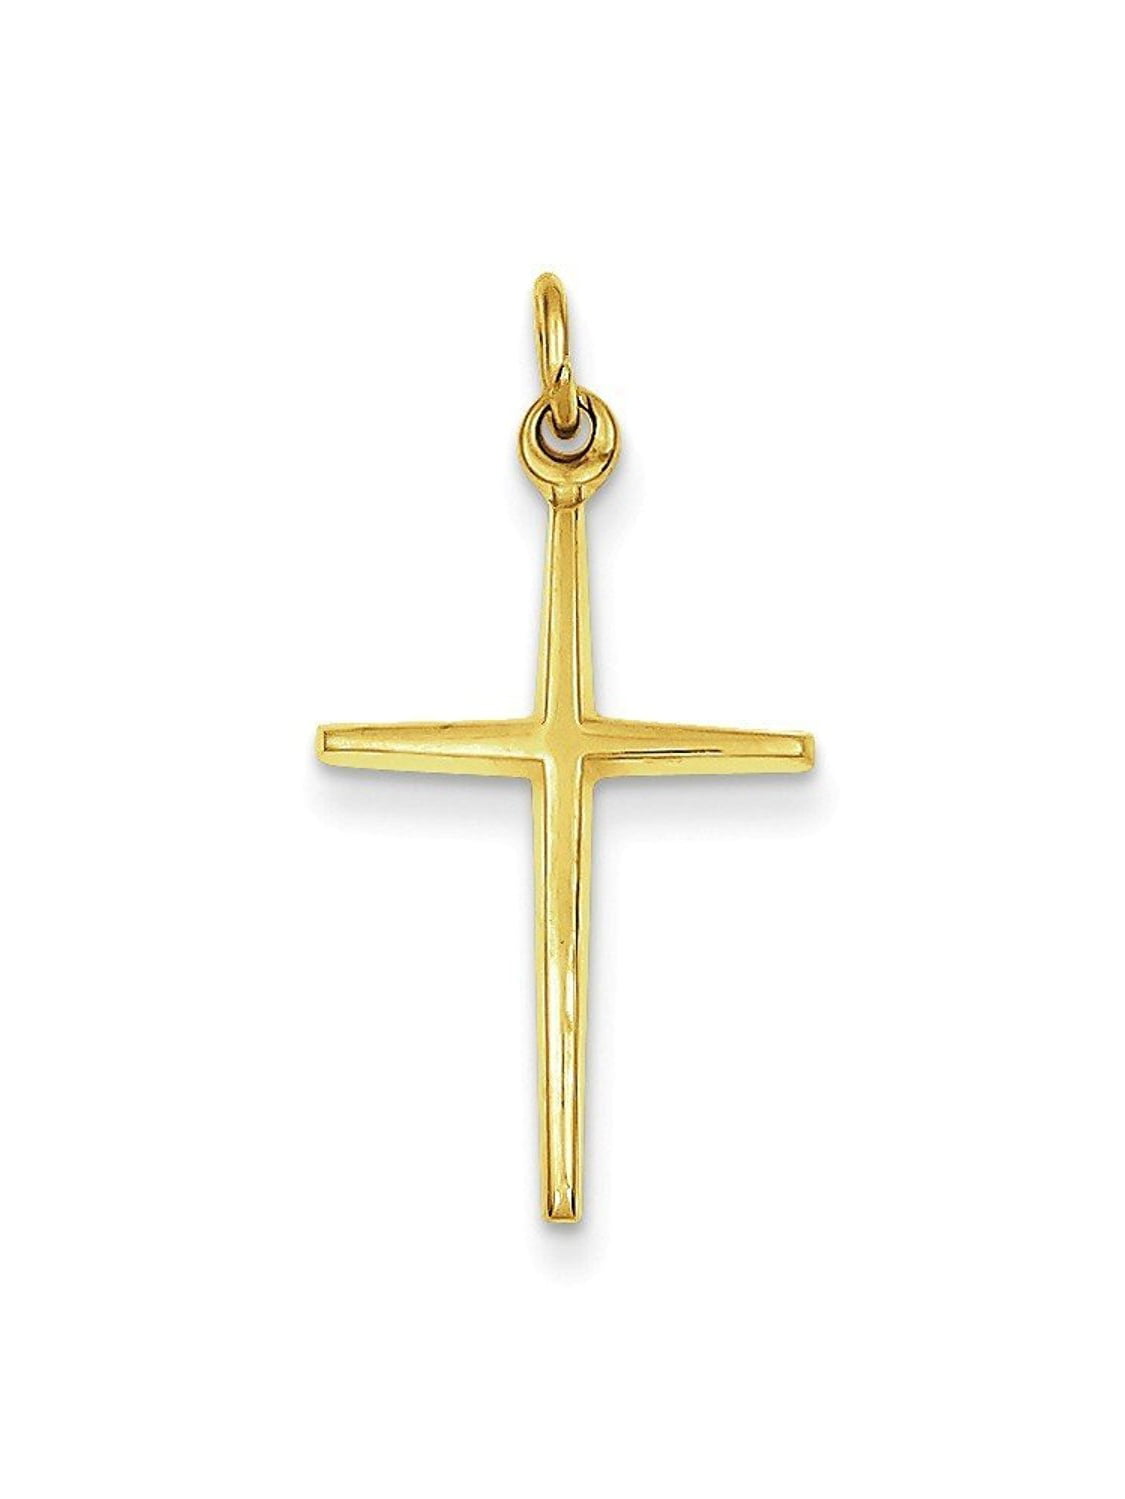 Sterling Silver and Gold-Plated Latin Cross Charm Pendant